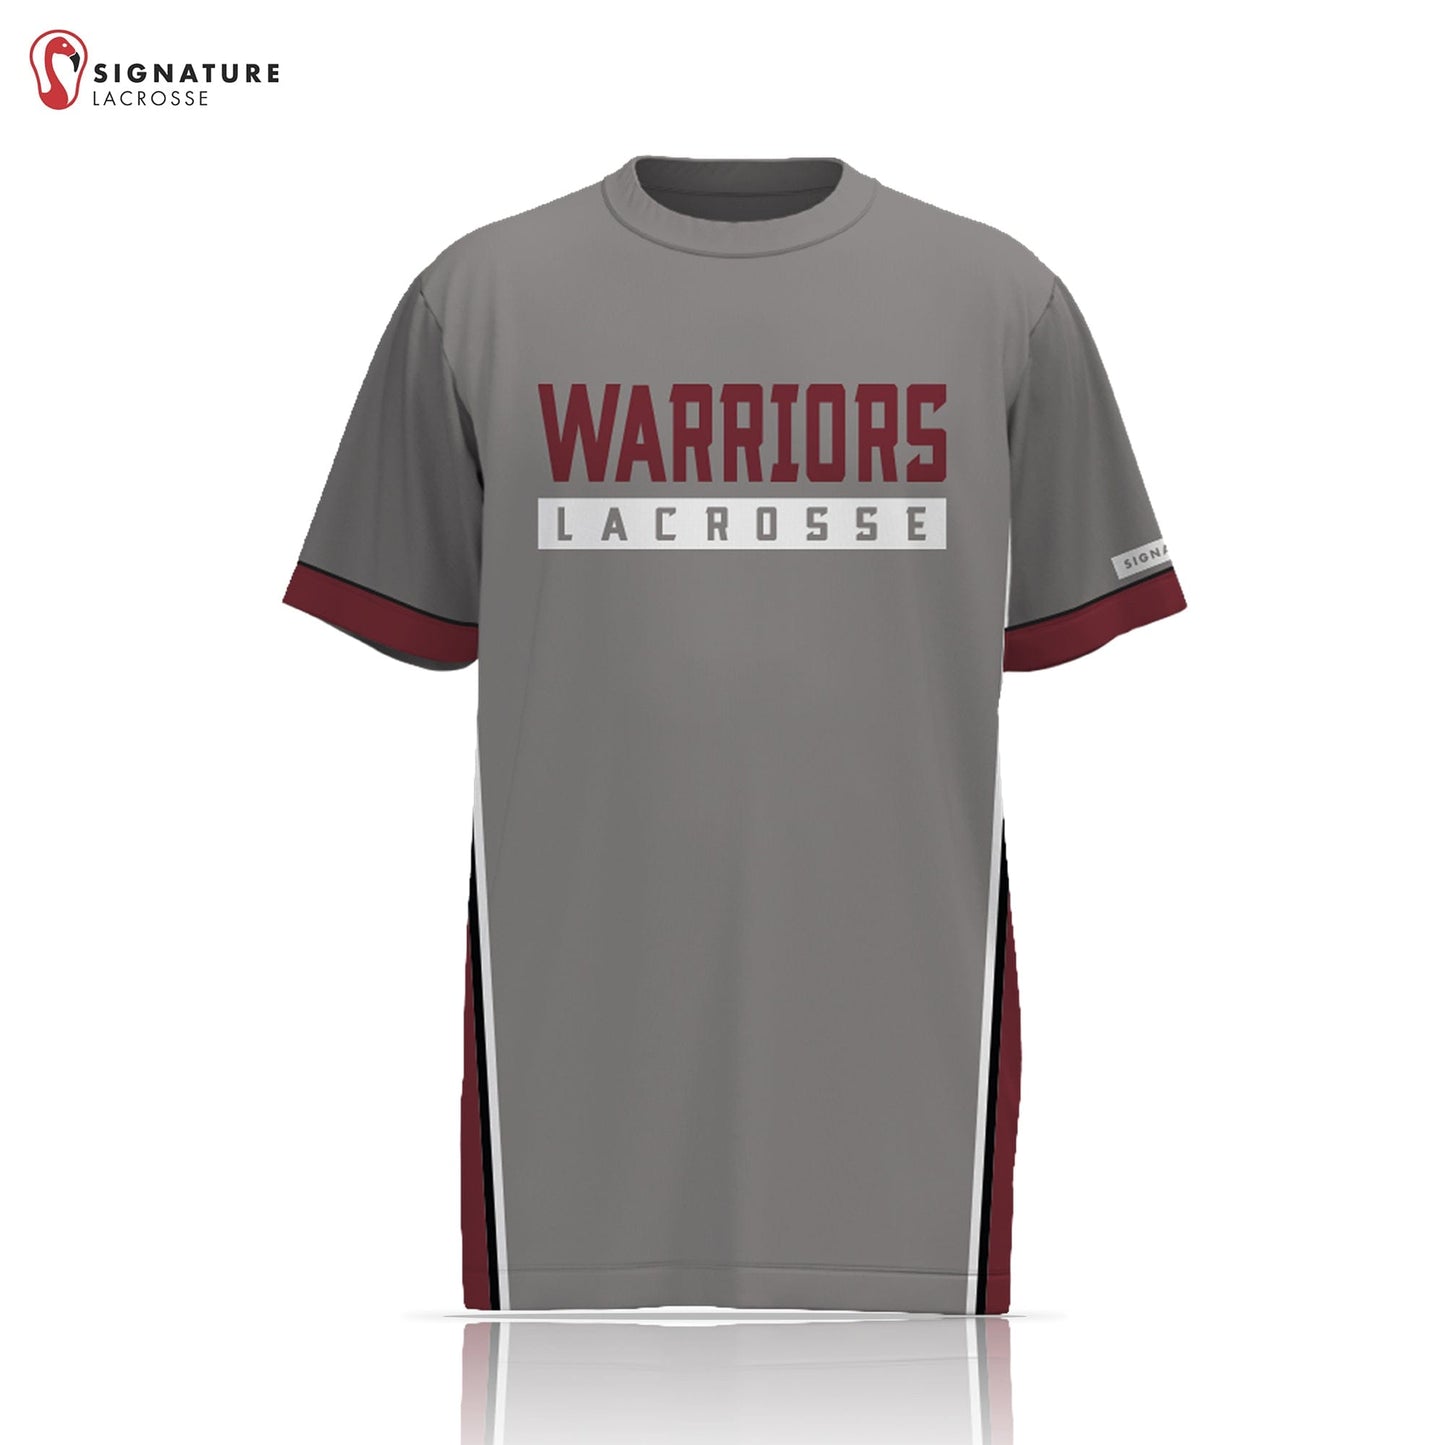 State College Player Short Sleeve Shooter Shirt: 3-4 Signature Lacrosse